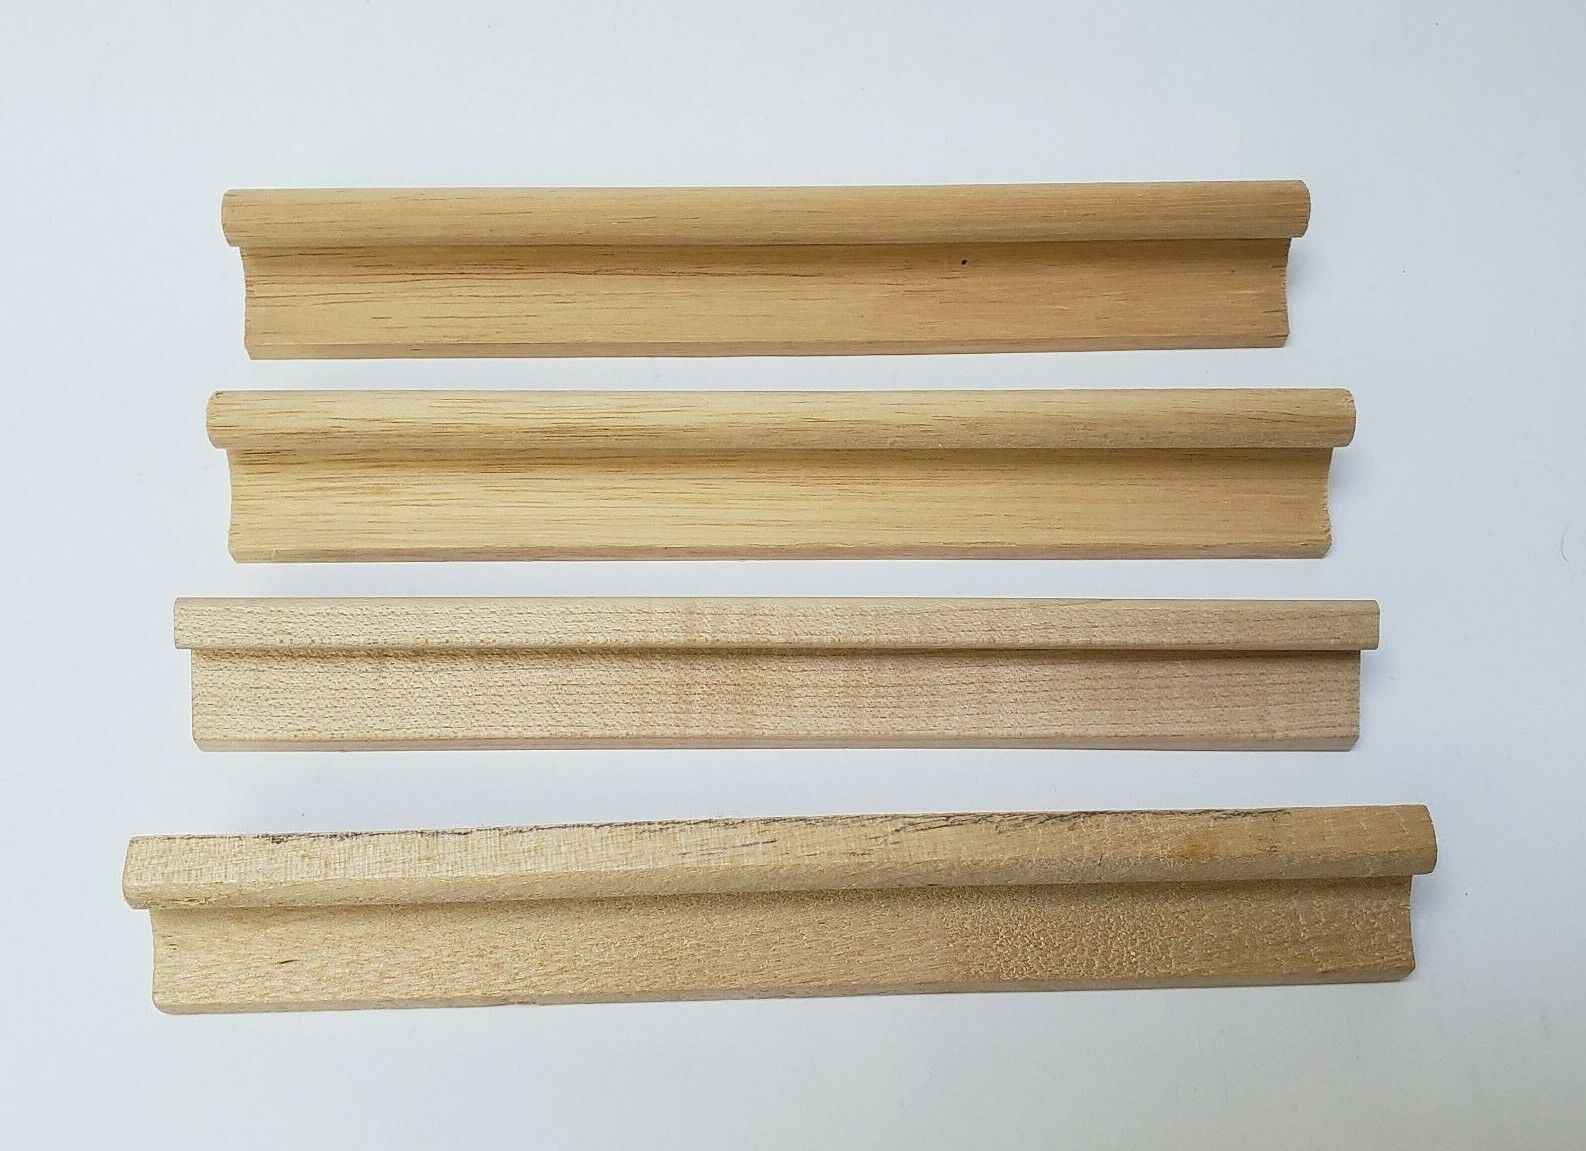 Primary image for Scrabble Tile Racks Holders Trays Crafts Replacement (Lot of 4) Wooden 